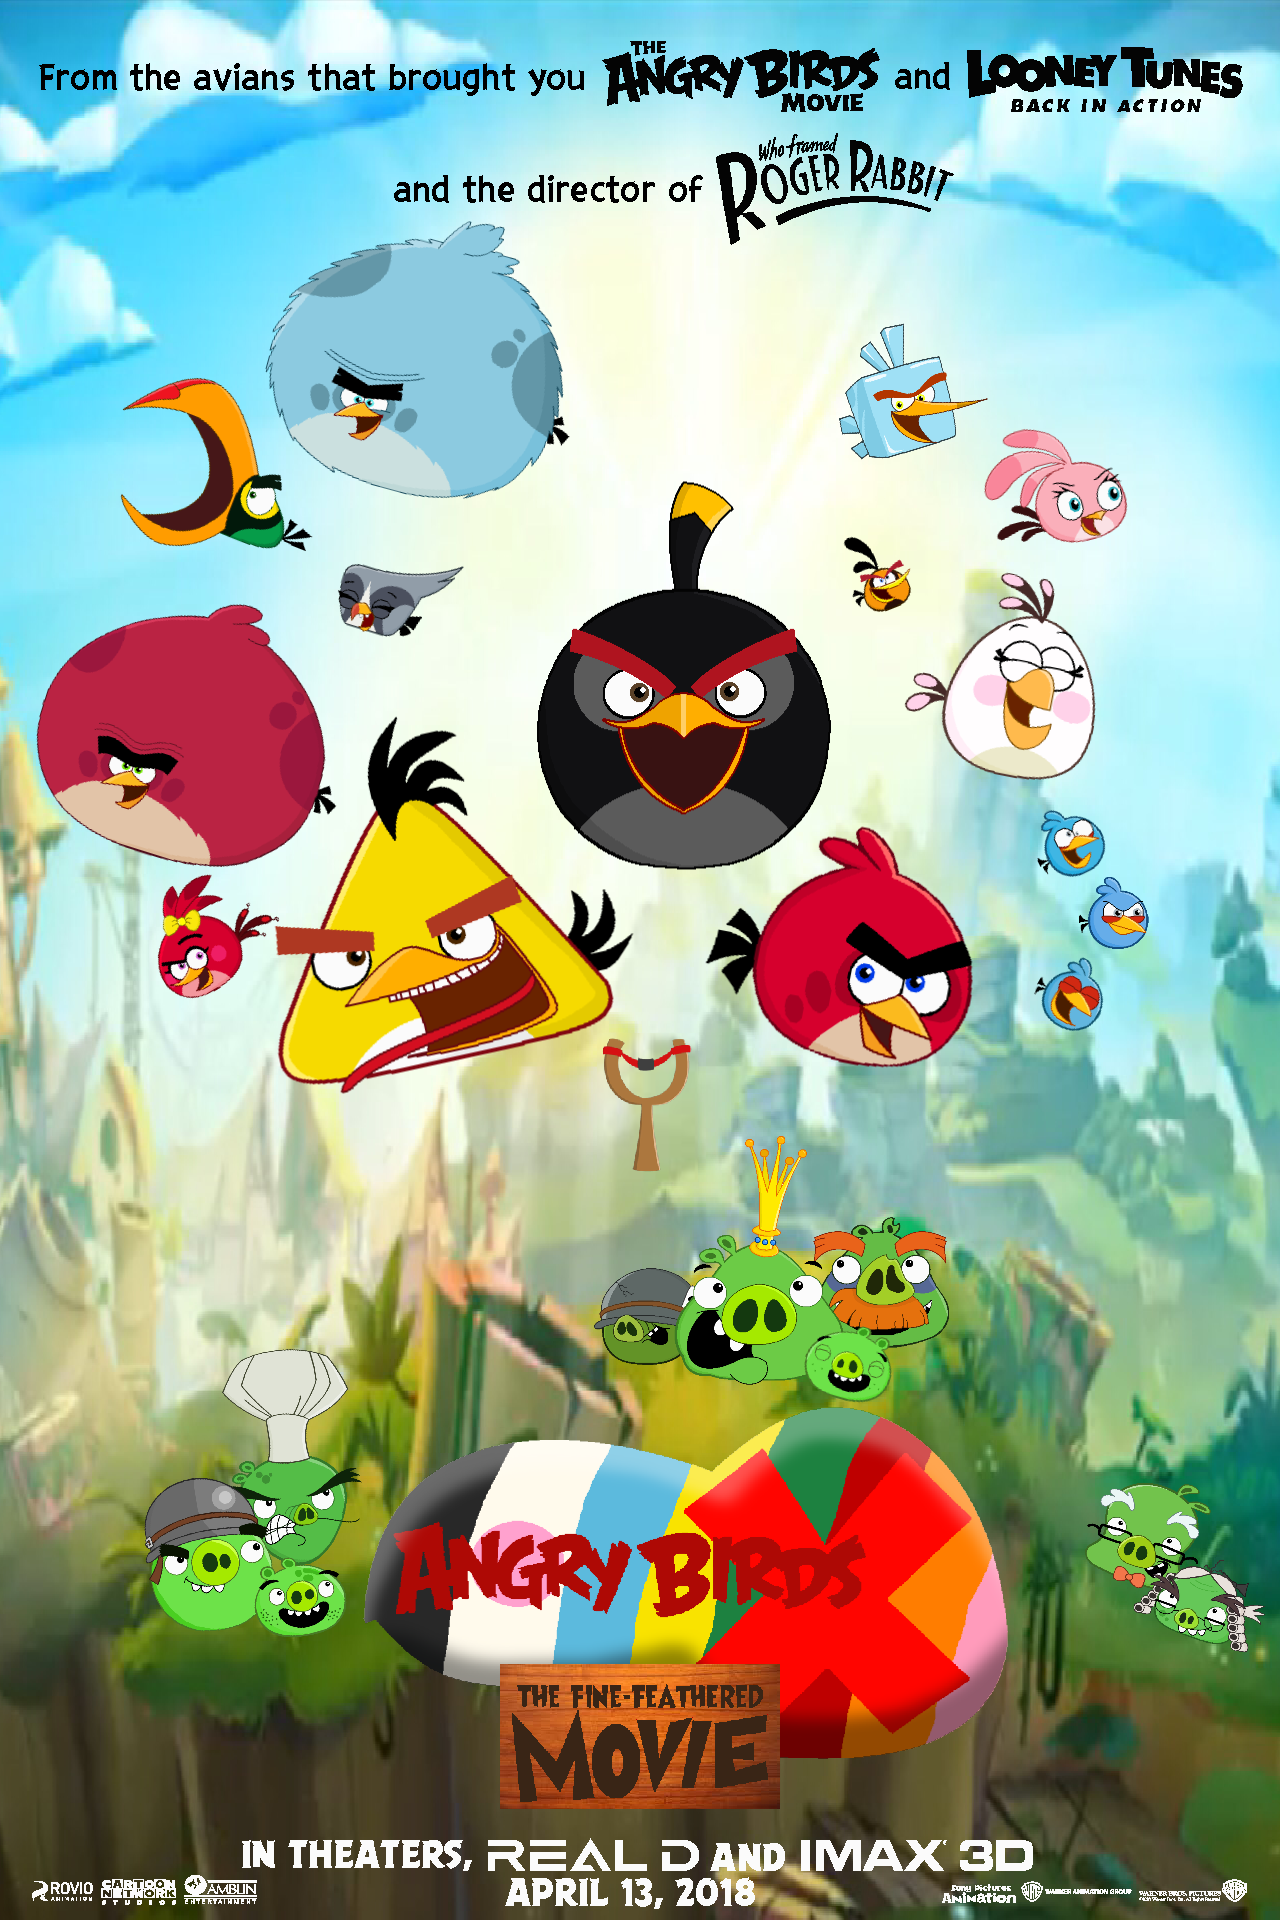 Angry Birds animated film to debut in 2016 | VentureBeat